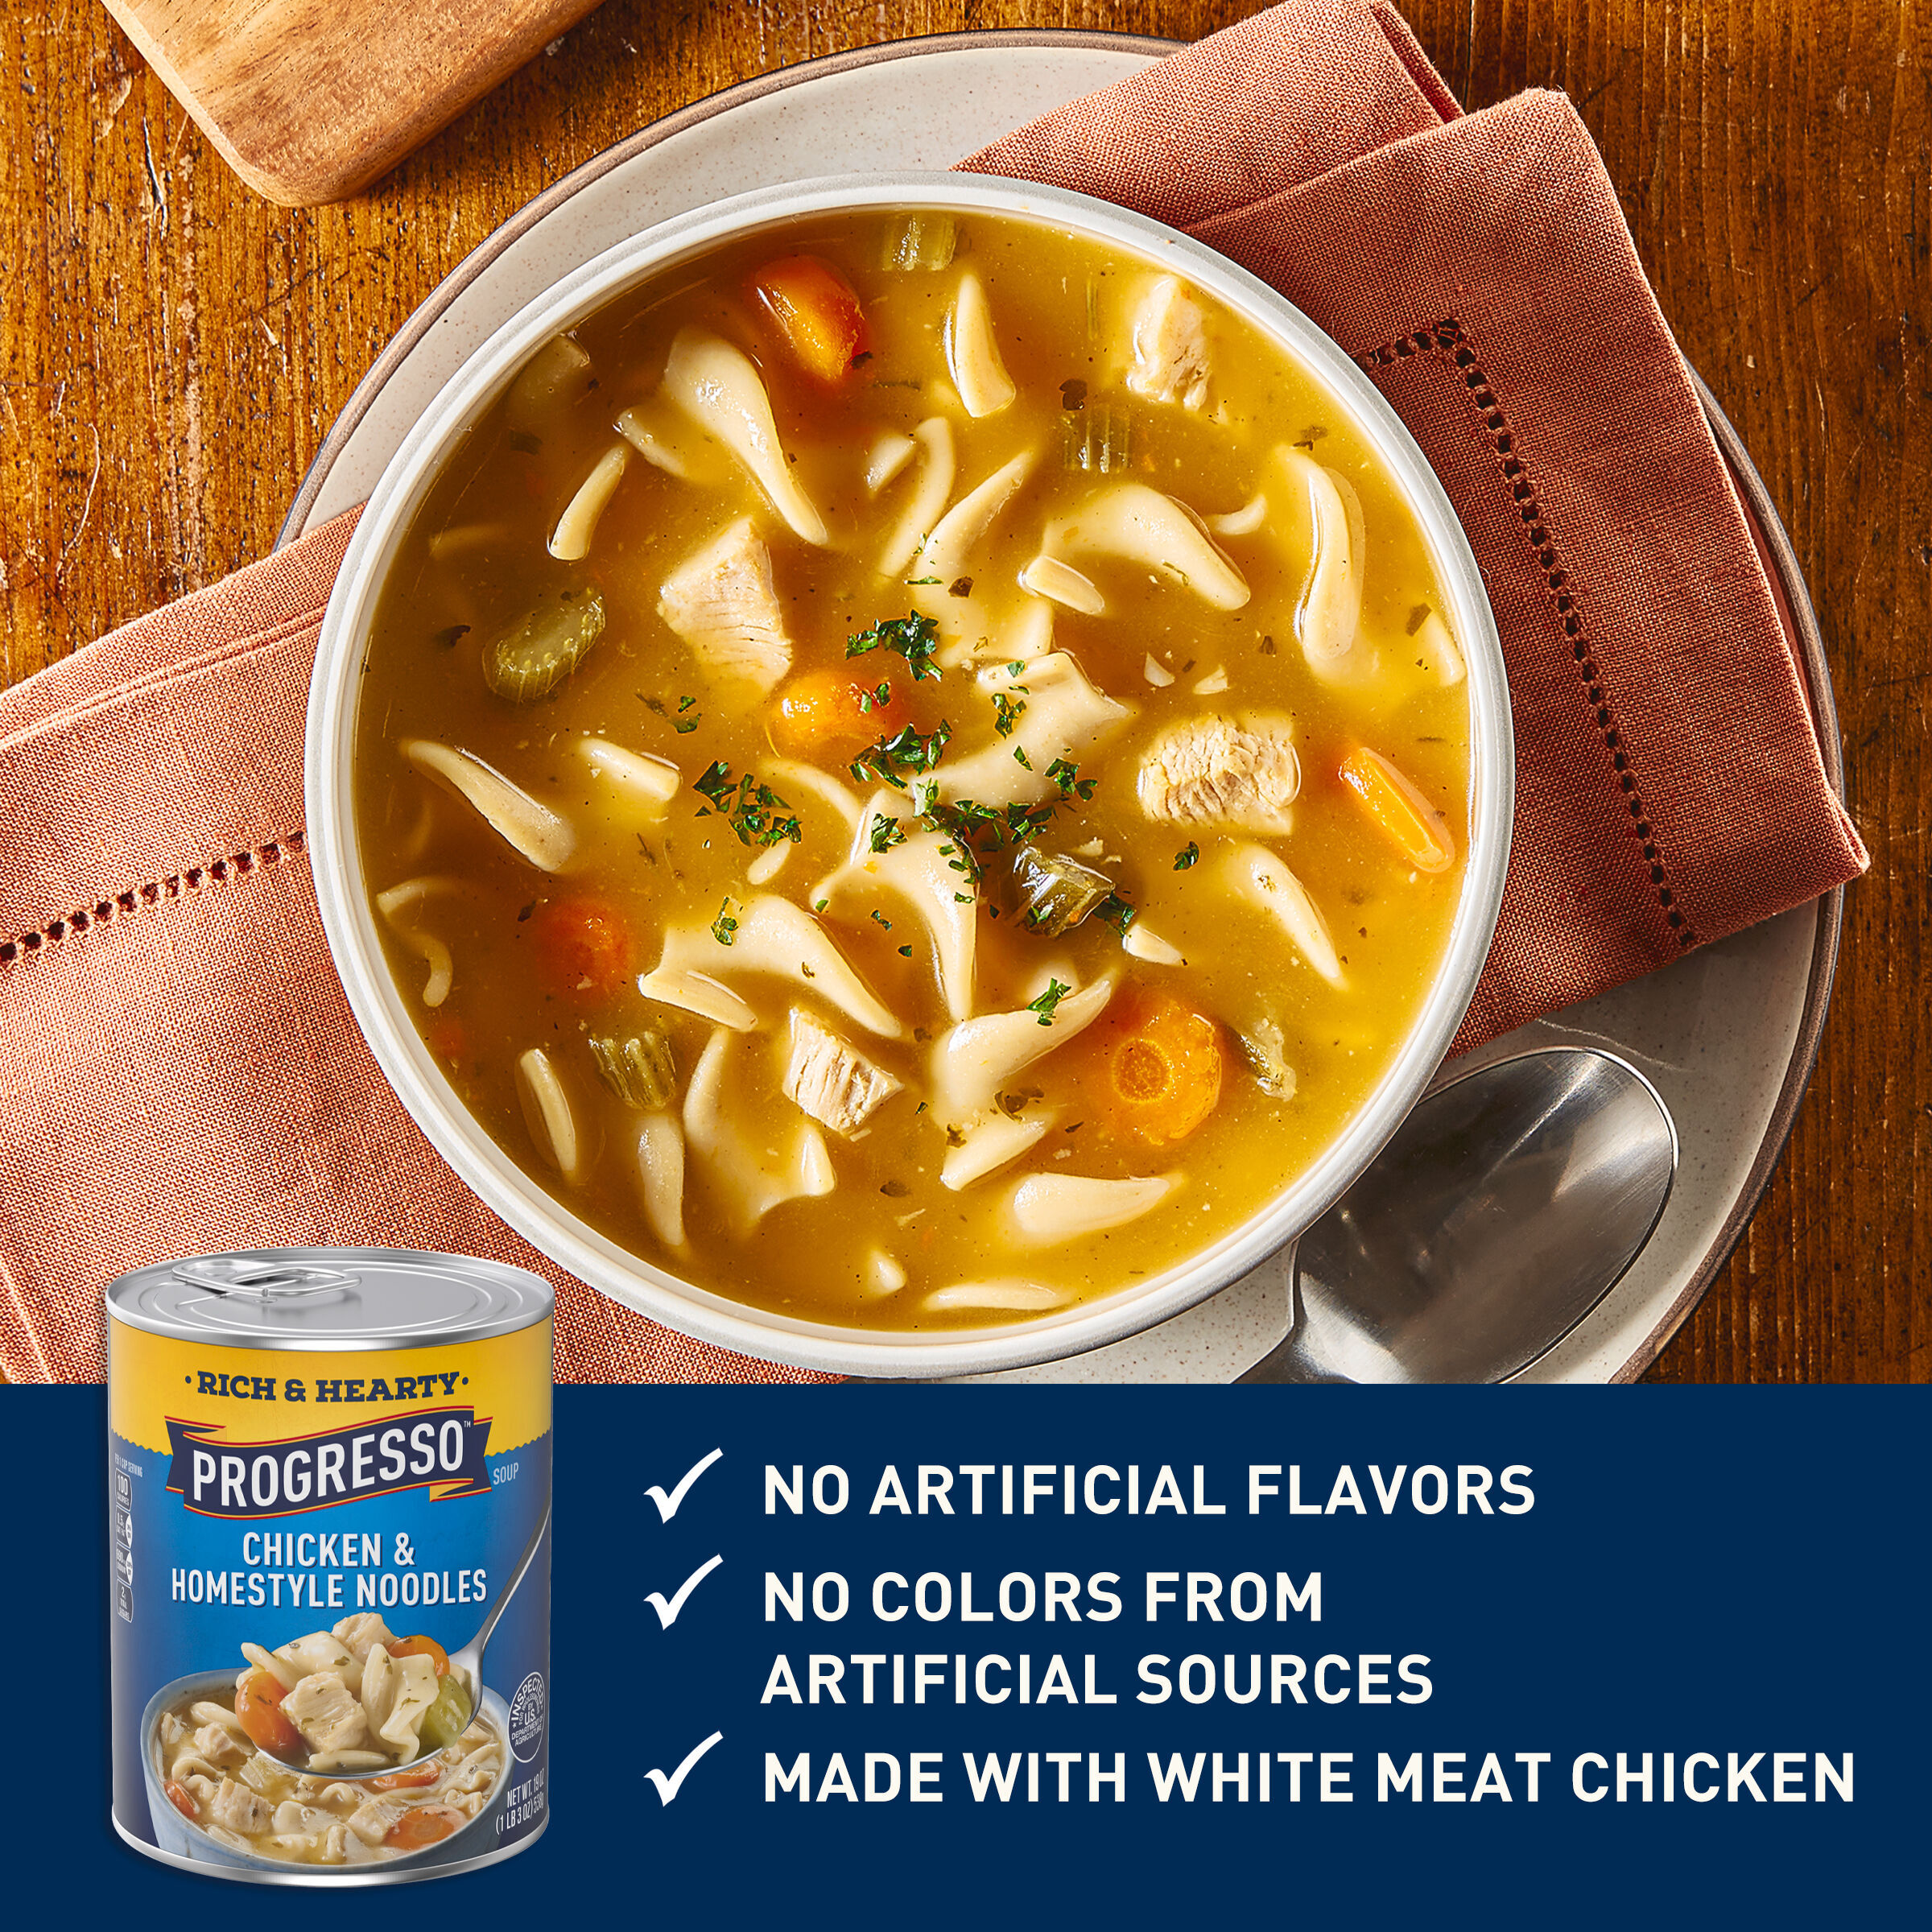 Progresso Rich & Hearty, Chicken & Homestyle Noodle Canned Soup, 19 oz. - image 4 of 9